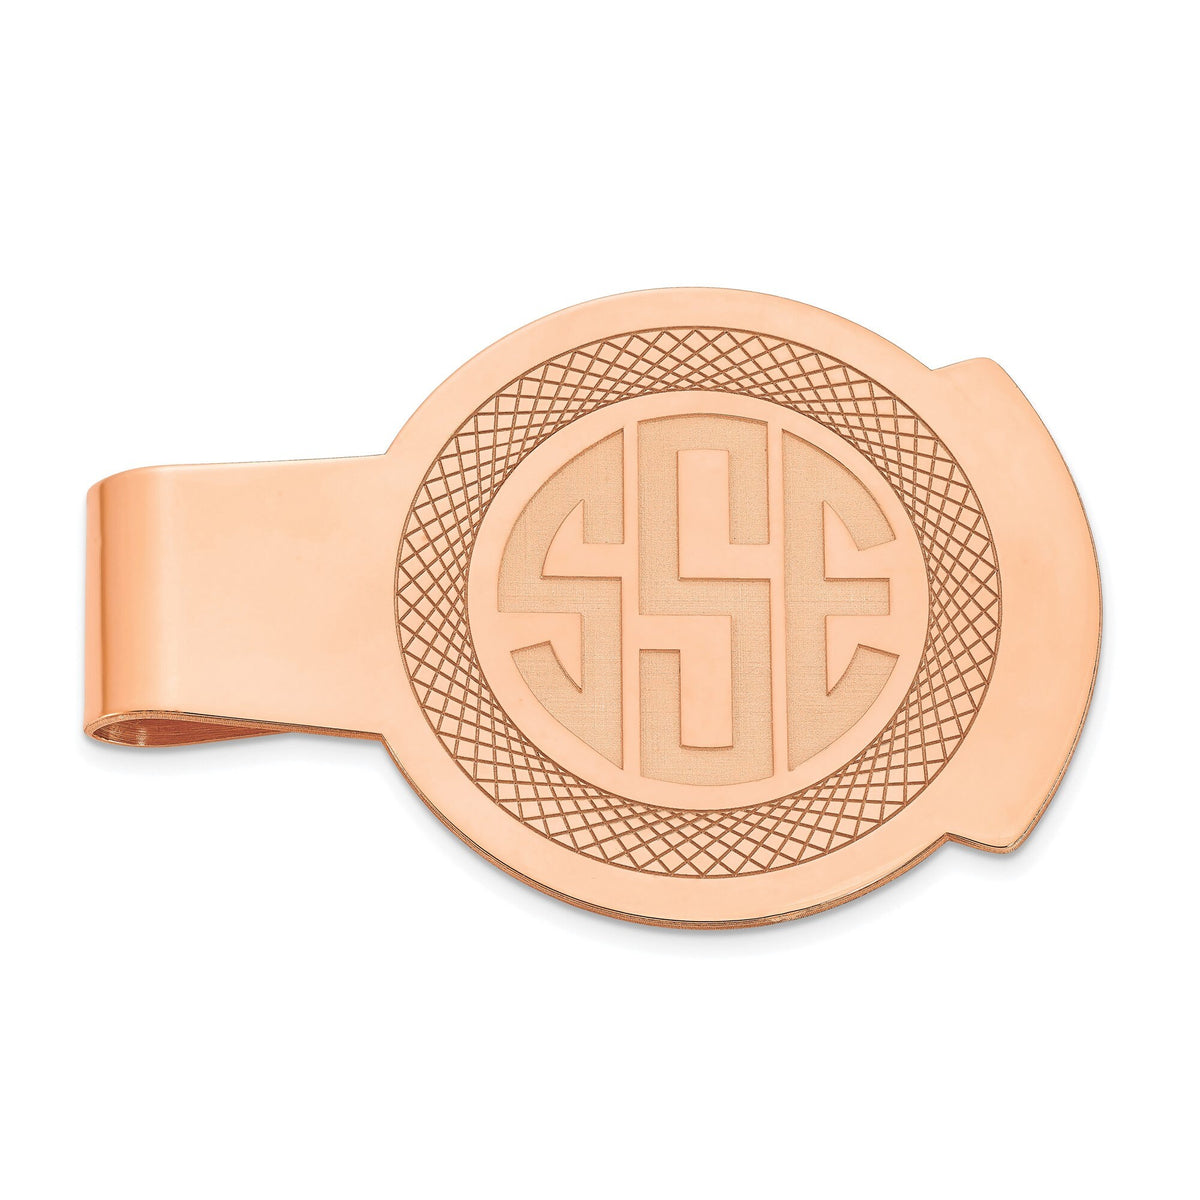 Personalized Round Monogram Money Clip -Solid Sterling Silver, Rose Gold Plated Silver& Gold Plated - Best Seller - MADE IN USA